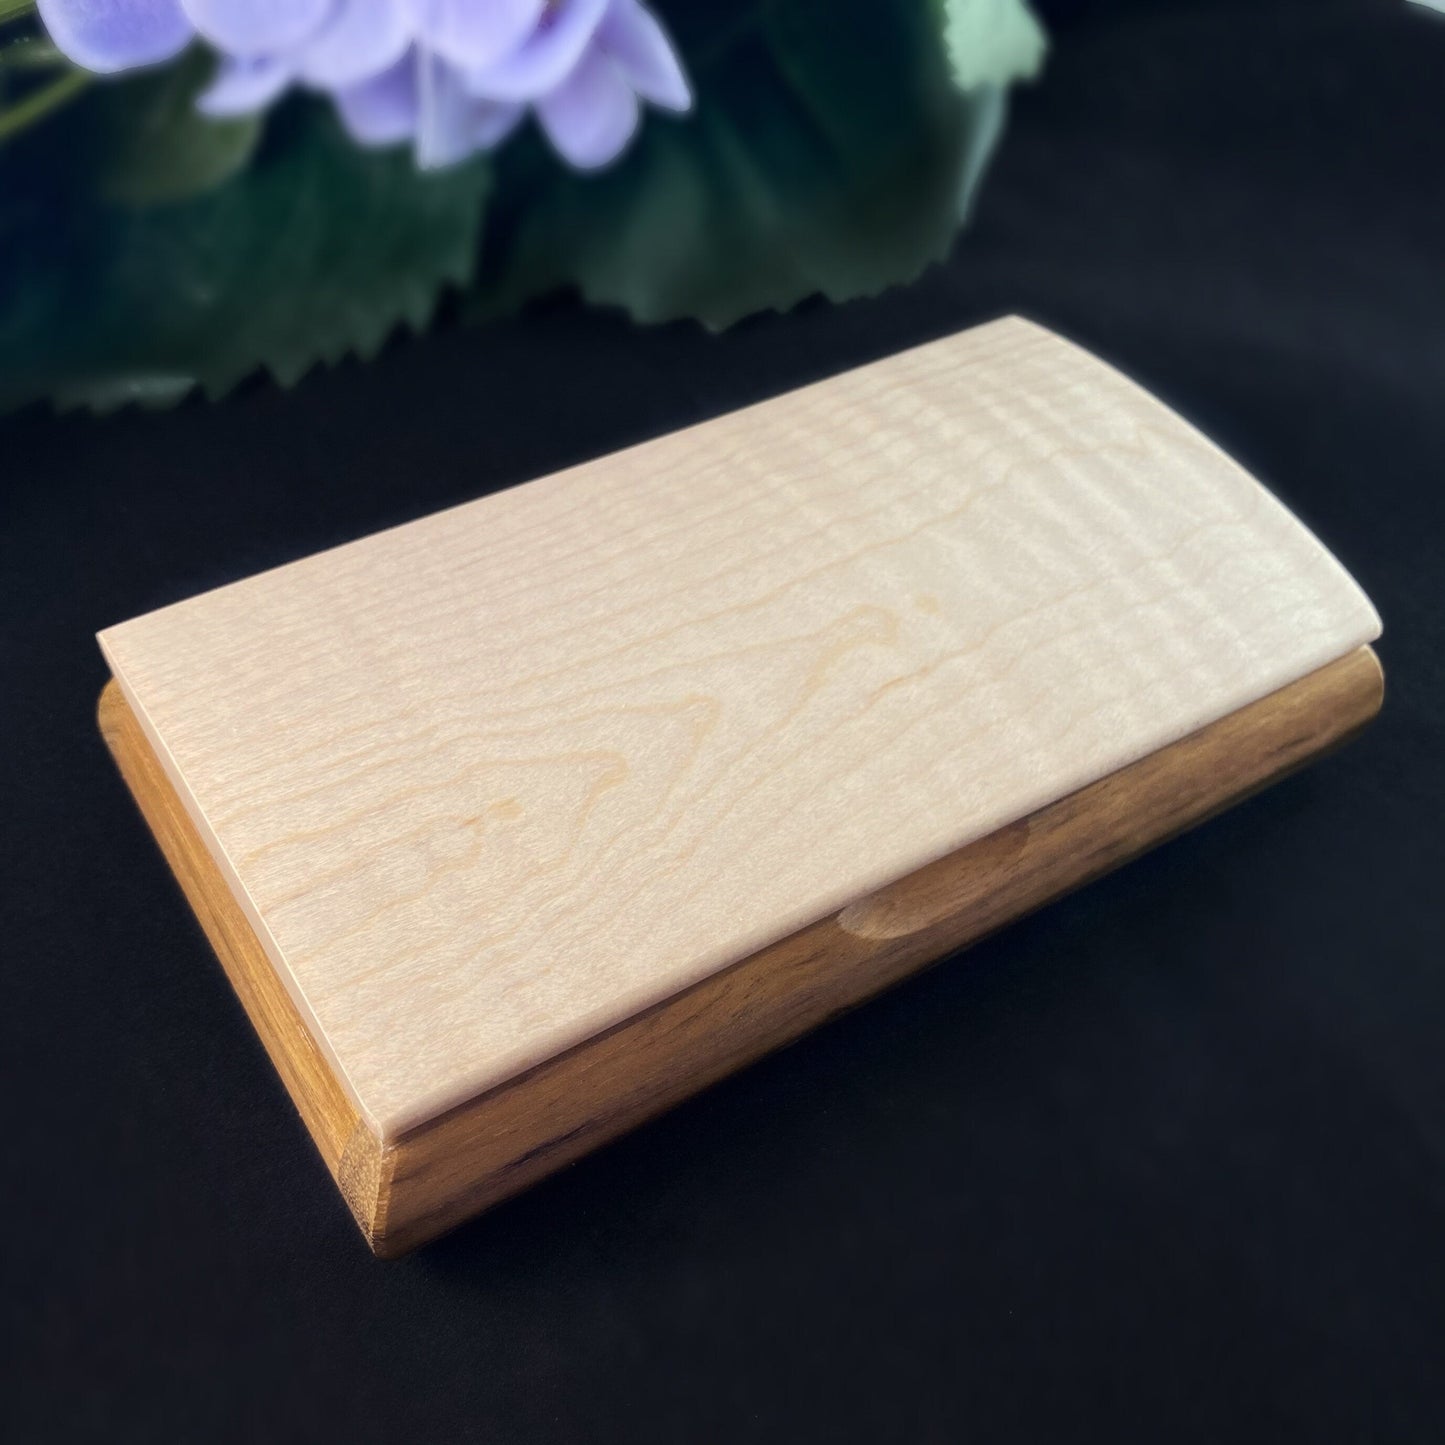 Handmade Wooden Box with Curly Maple and Shedua, Made in USA